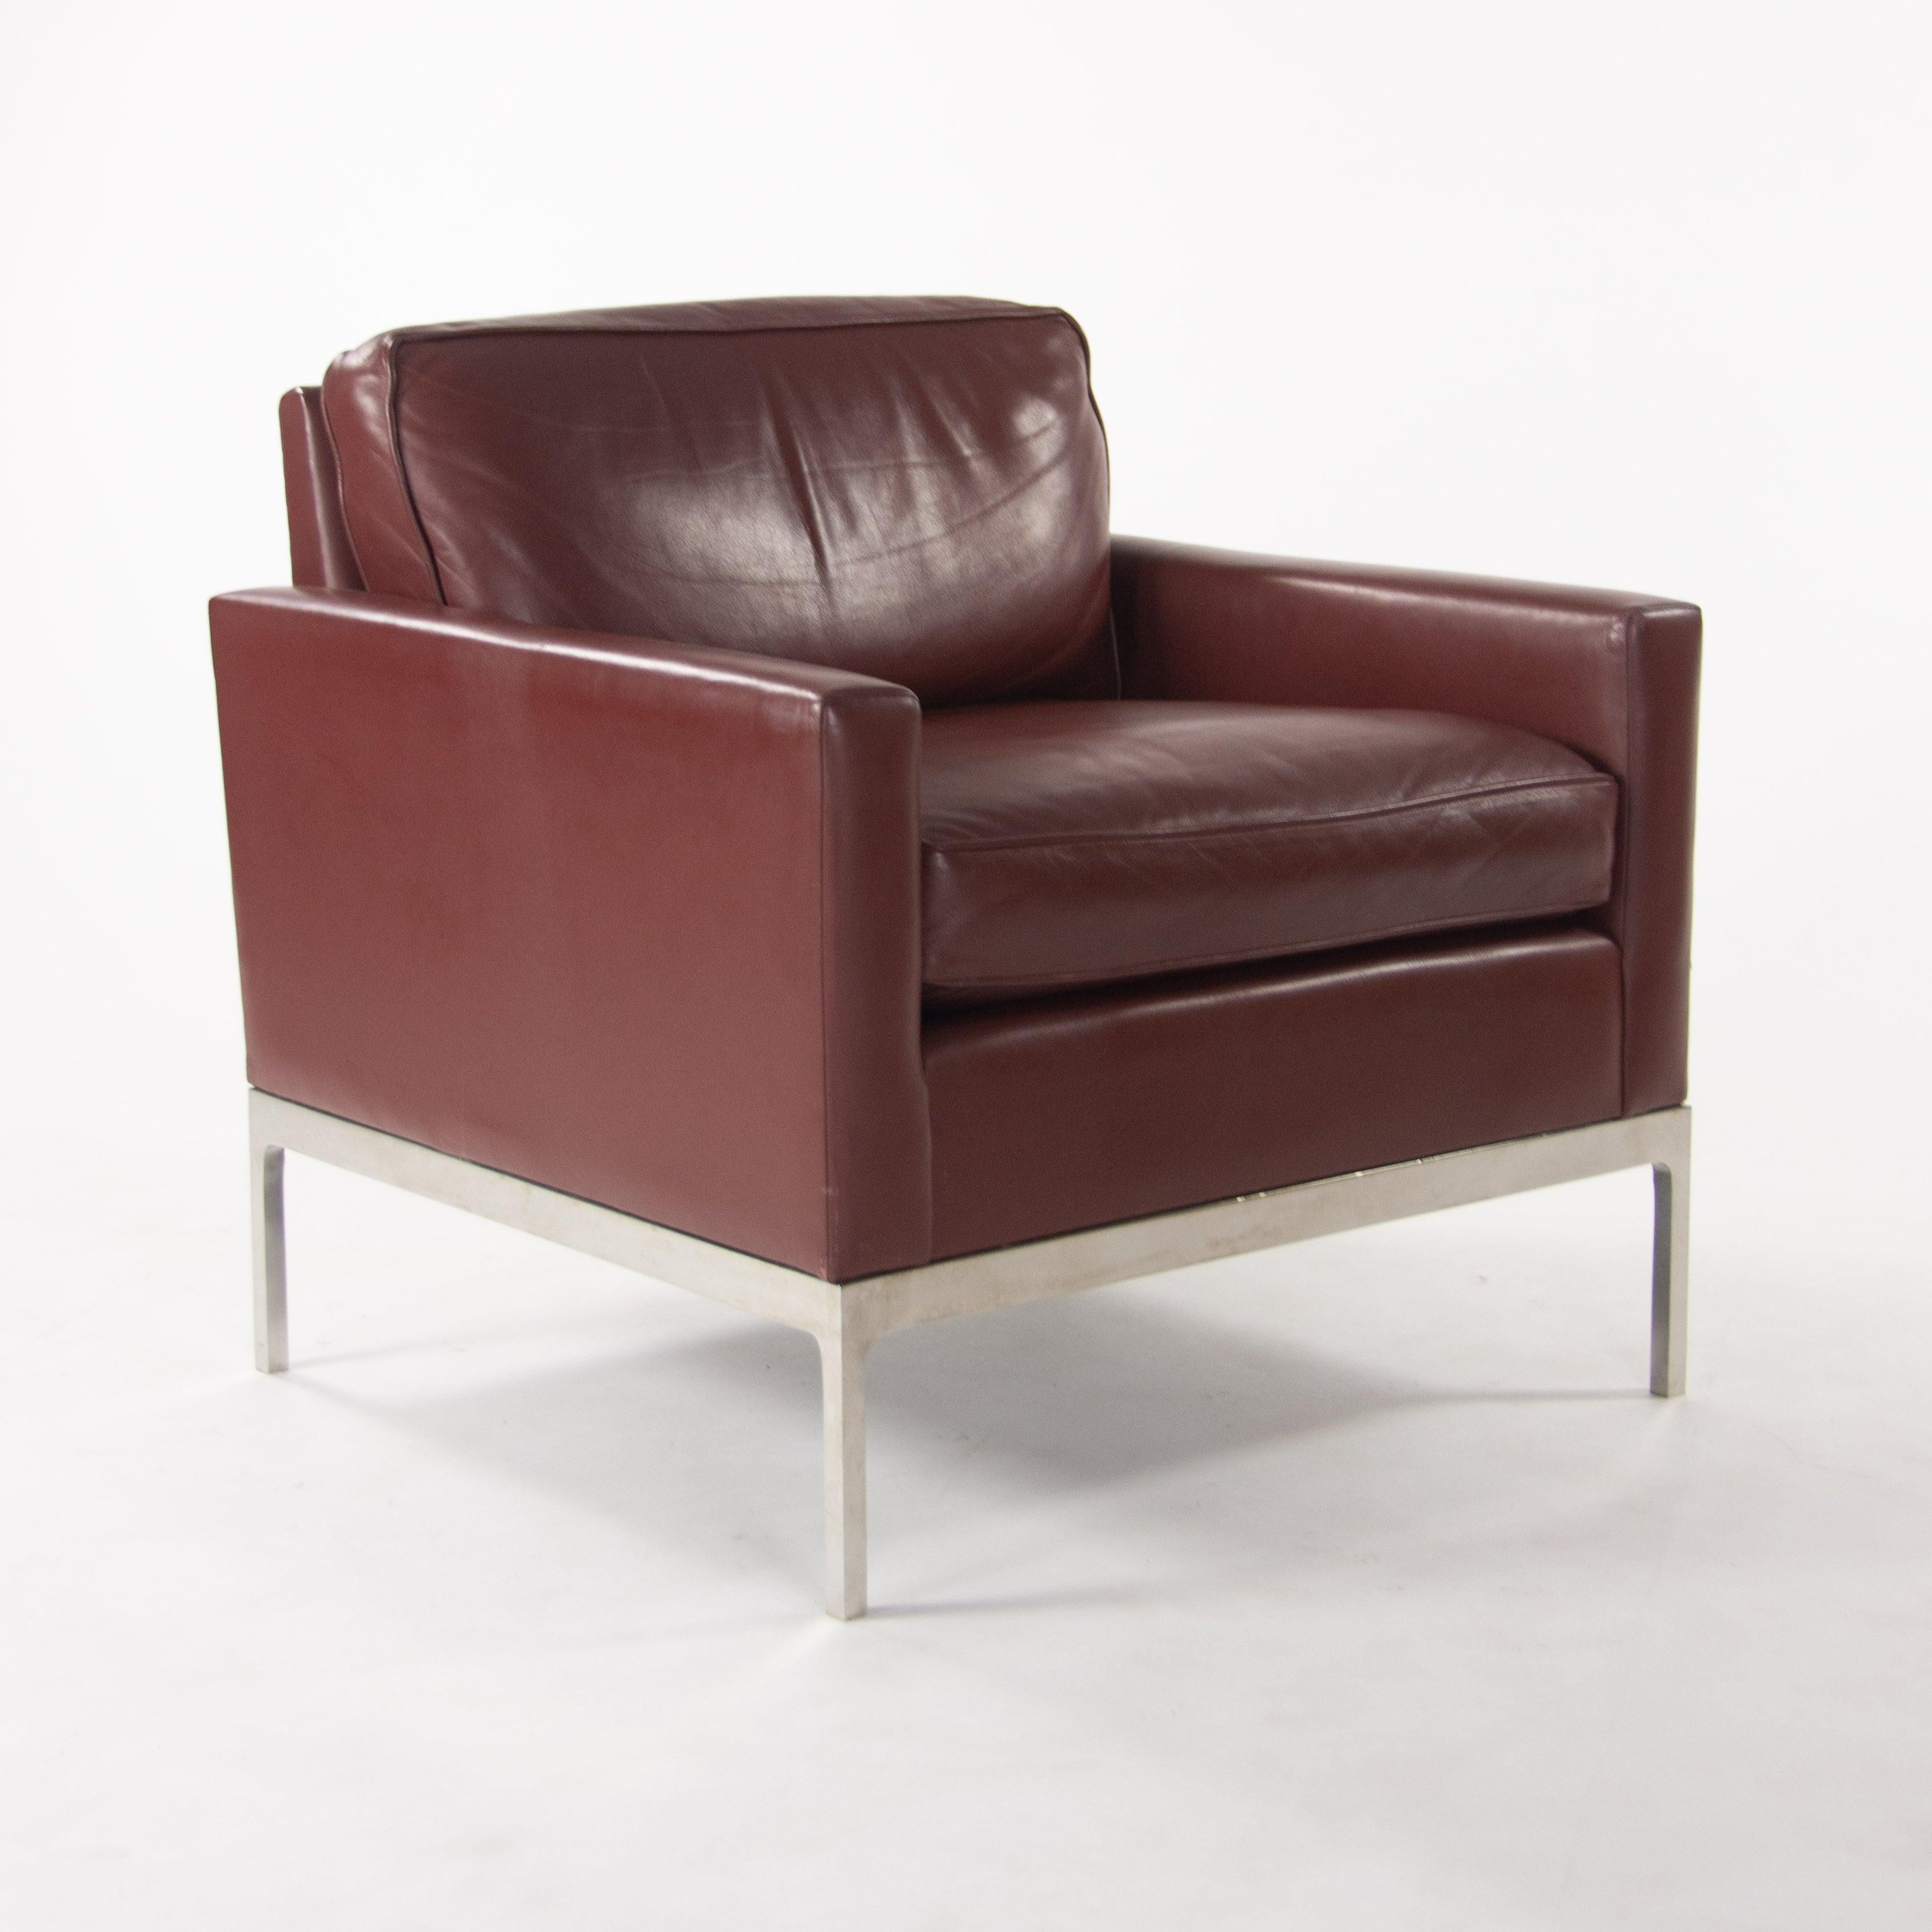 Listed for sale is an original Nicos Zographos red Leather lounge chair with arms. This example is fully upholstered in leather, with a polished stainless steel base.  
Nicos Zographos and his company (Zographos Designs ltd.) were prolific in